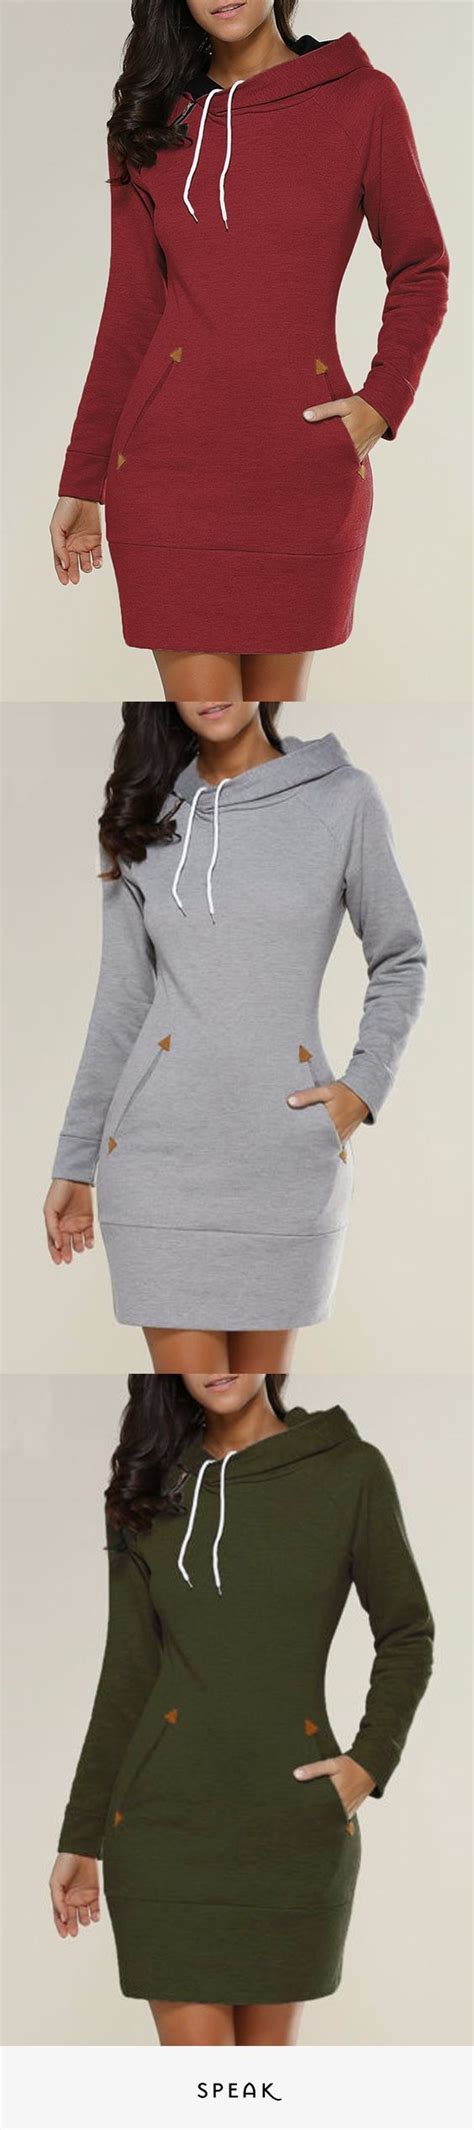 Turn Hooded Sweater Dress With Pockets Fashion Clothes Hooded